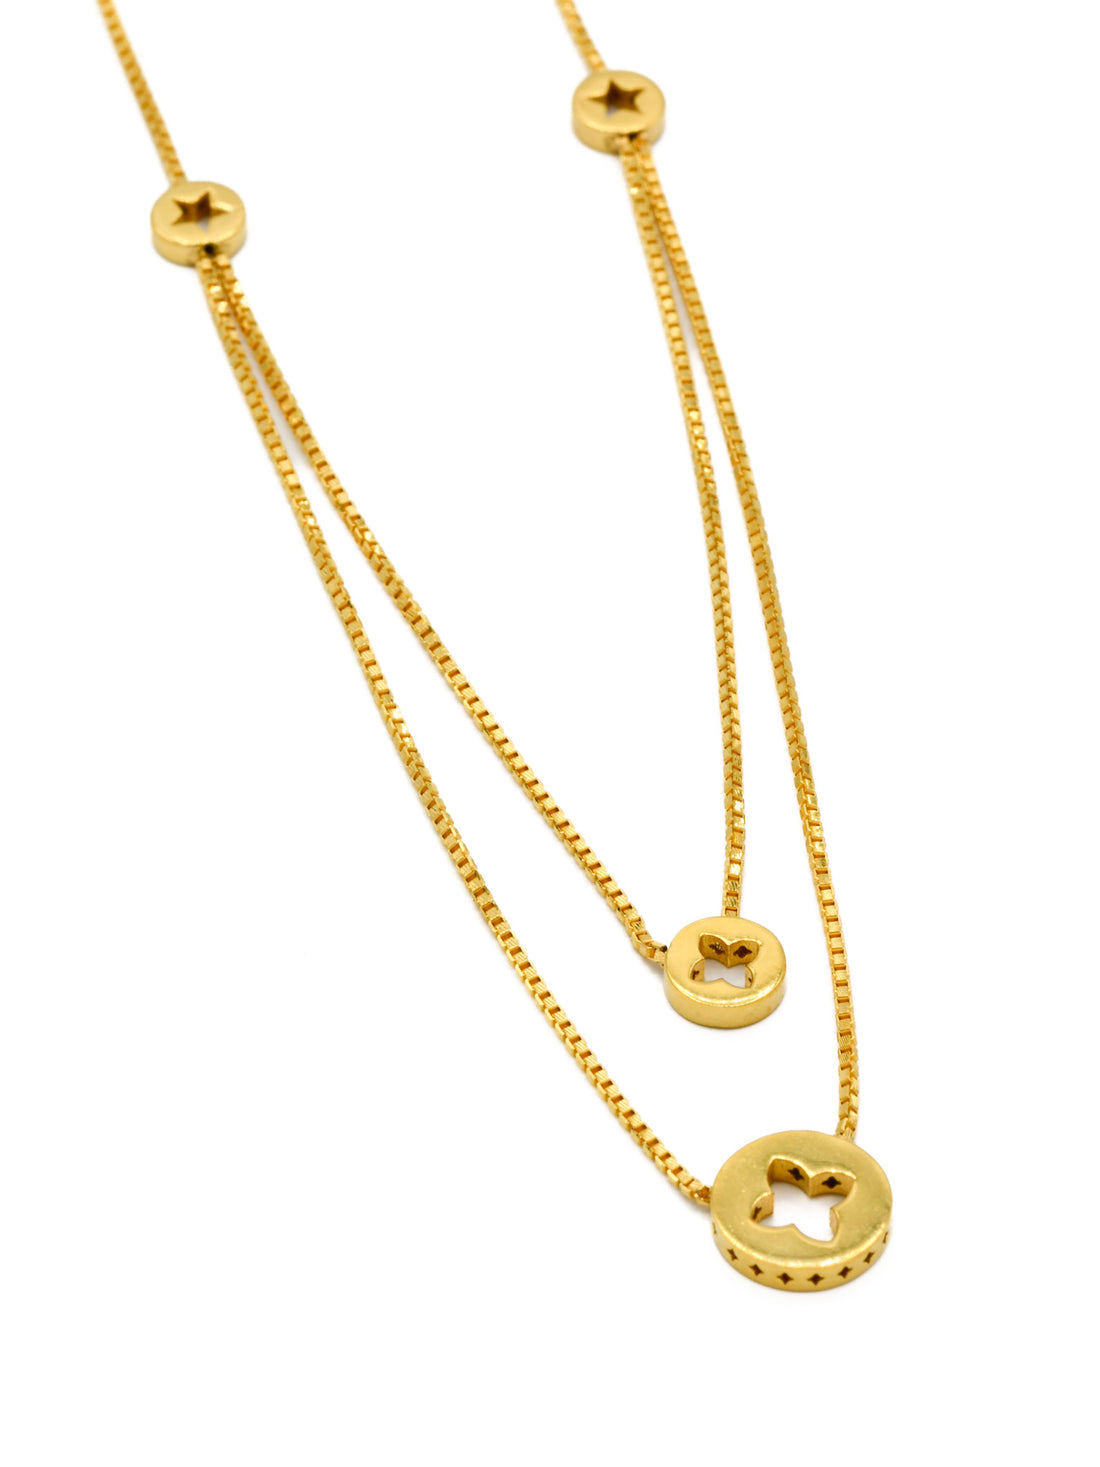 22ct Gold Fancy Chain - Roop Darshan